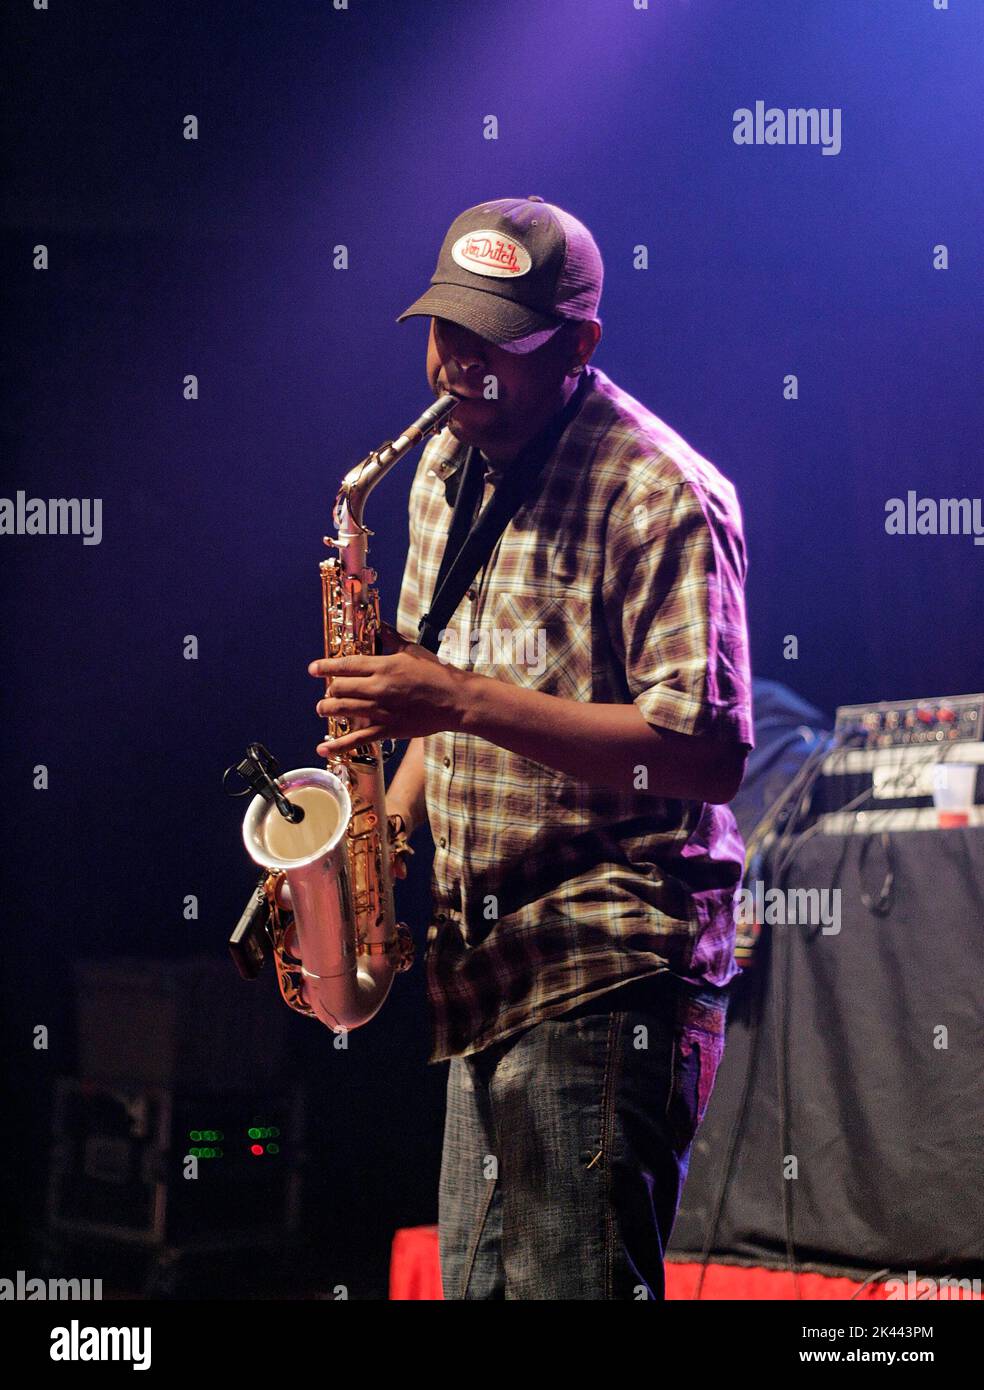 Saxophonist Jarel 'Jarez' Posey performs during a Coolio concert on Monday, Oct. 5, 2009 at club 527 Main in Murfreesboro, Rutherford County, TN, USA. Born Artis Leon Ivey Jr., Coolio is perhaps best known for his mid-1990s hits 'Gangsta's Paradise' and 'Fantastic Voyage,' winning the 1996 Grammy for Best Rap Solo Performance and 1996 MTV Video Music Award for 'Gangsta's Paradise' and being crowned Favorite Rap/Hip-Hop Artist at the 1996 American Music Awards. (Apex MediaWire Photo by Billy Suratt) Stock Photo